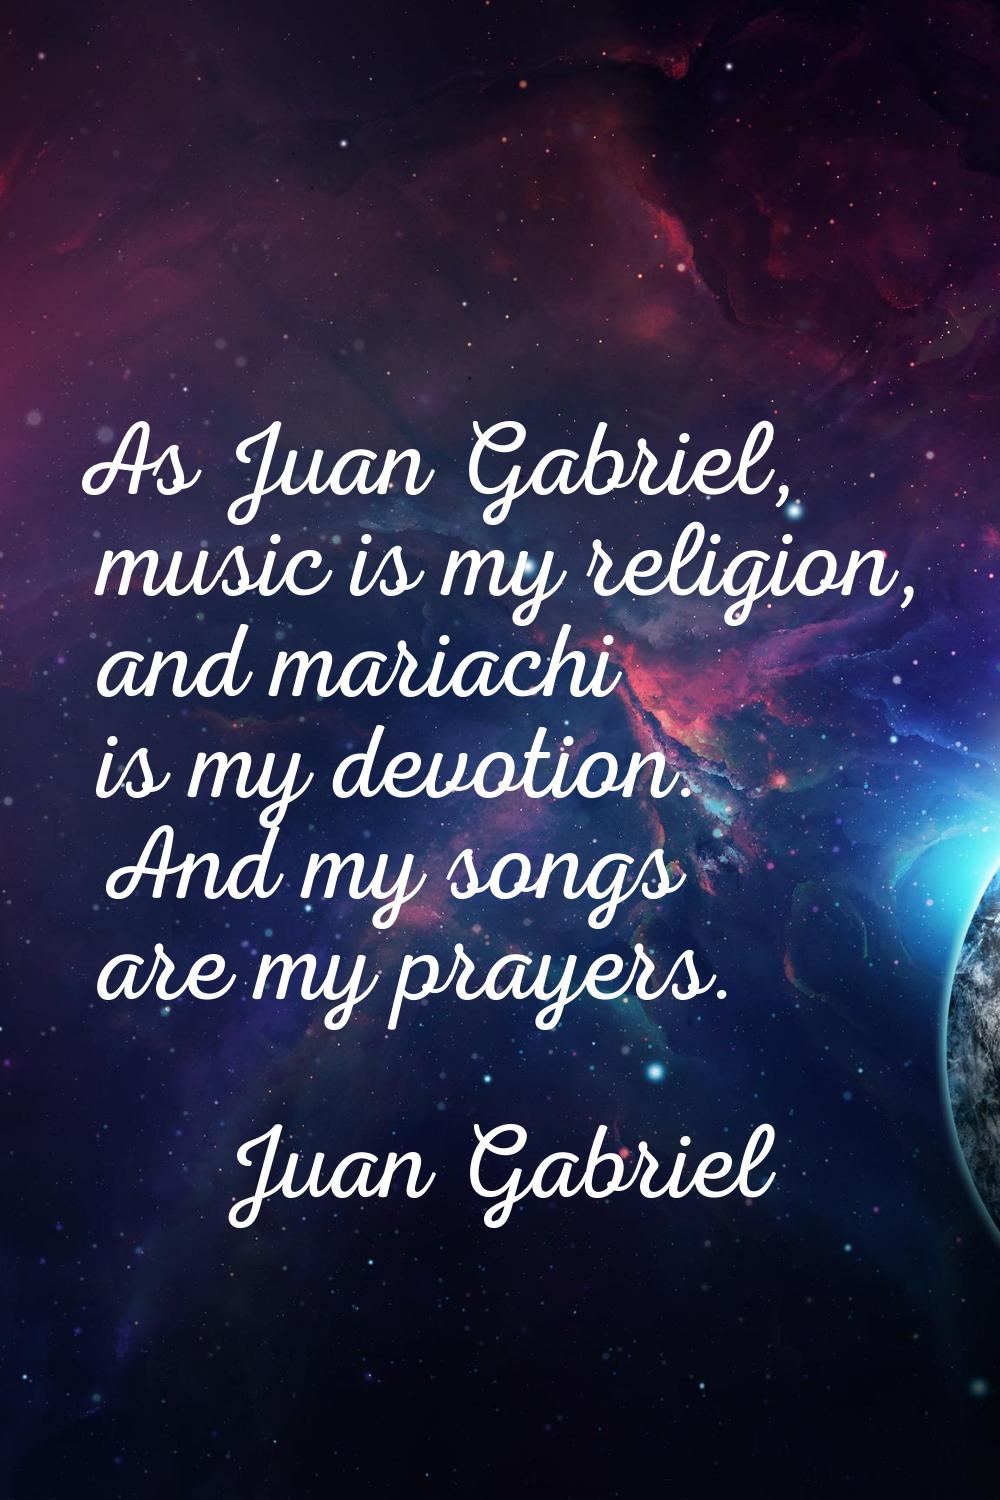 As Juan Gabriel, music is my religion, and mariachi is my devotion. And my songs are my prayers.